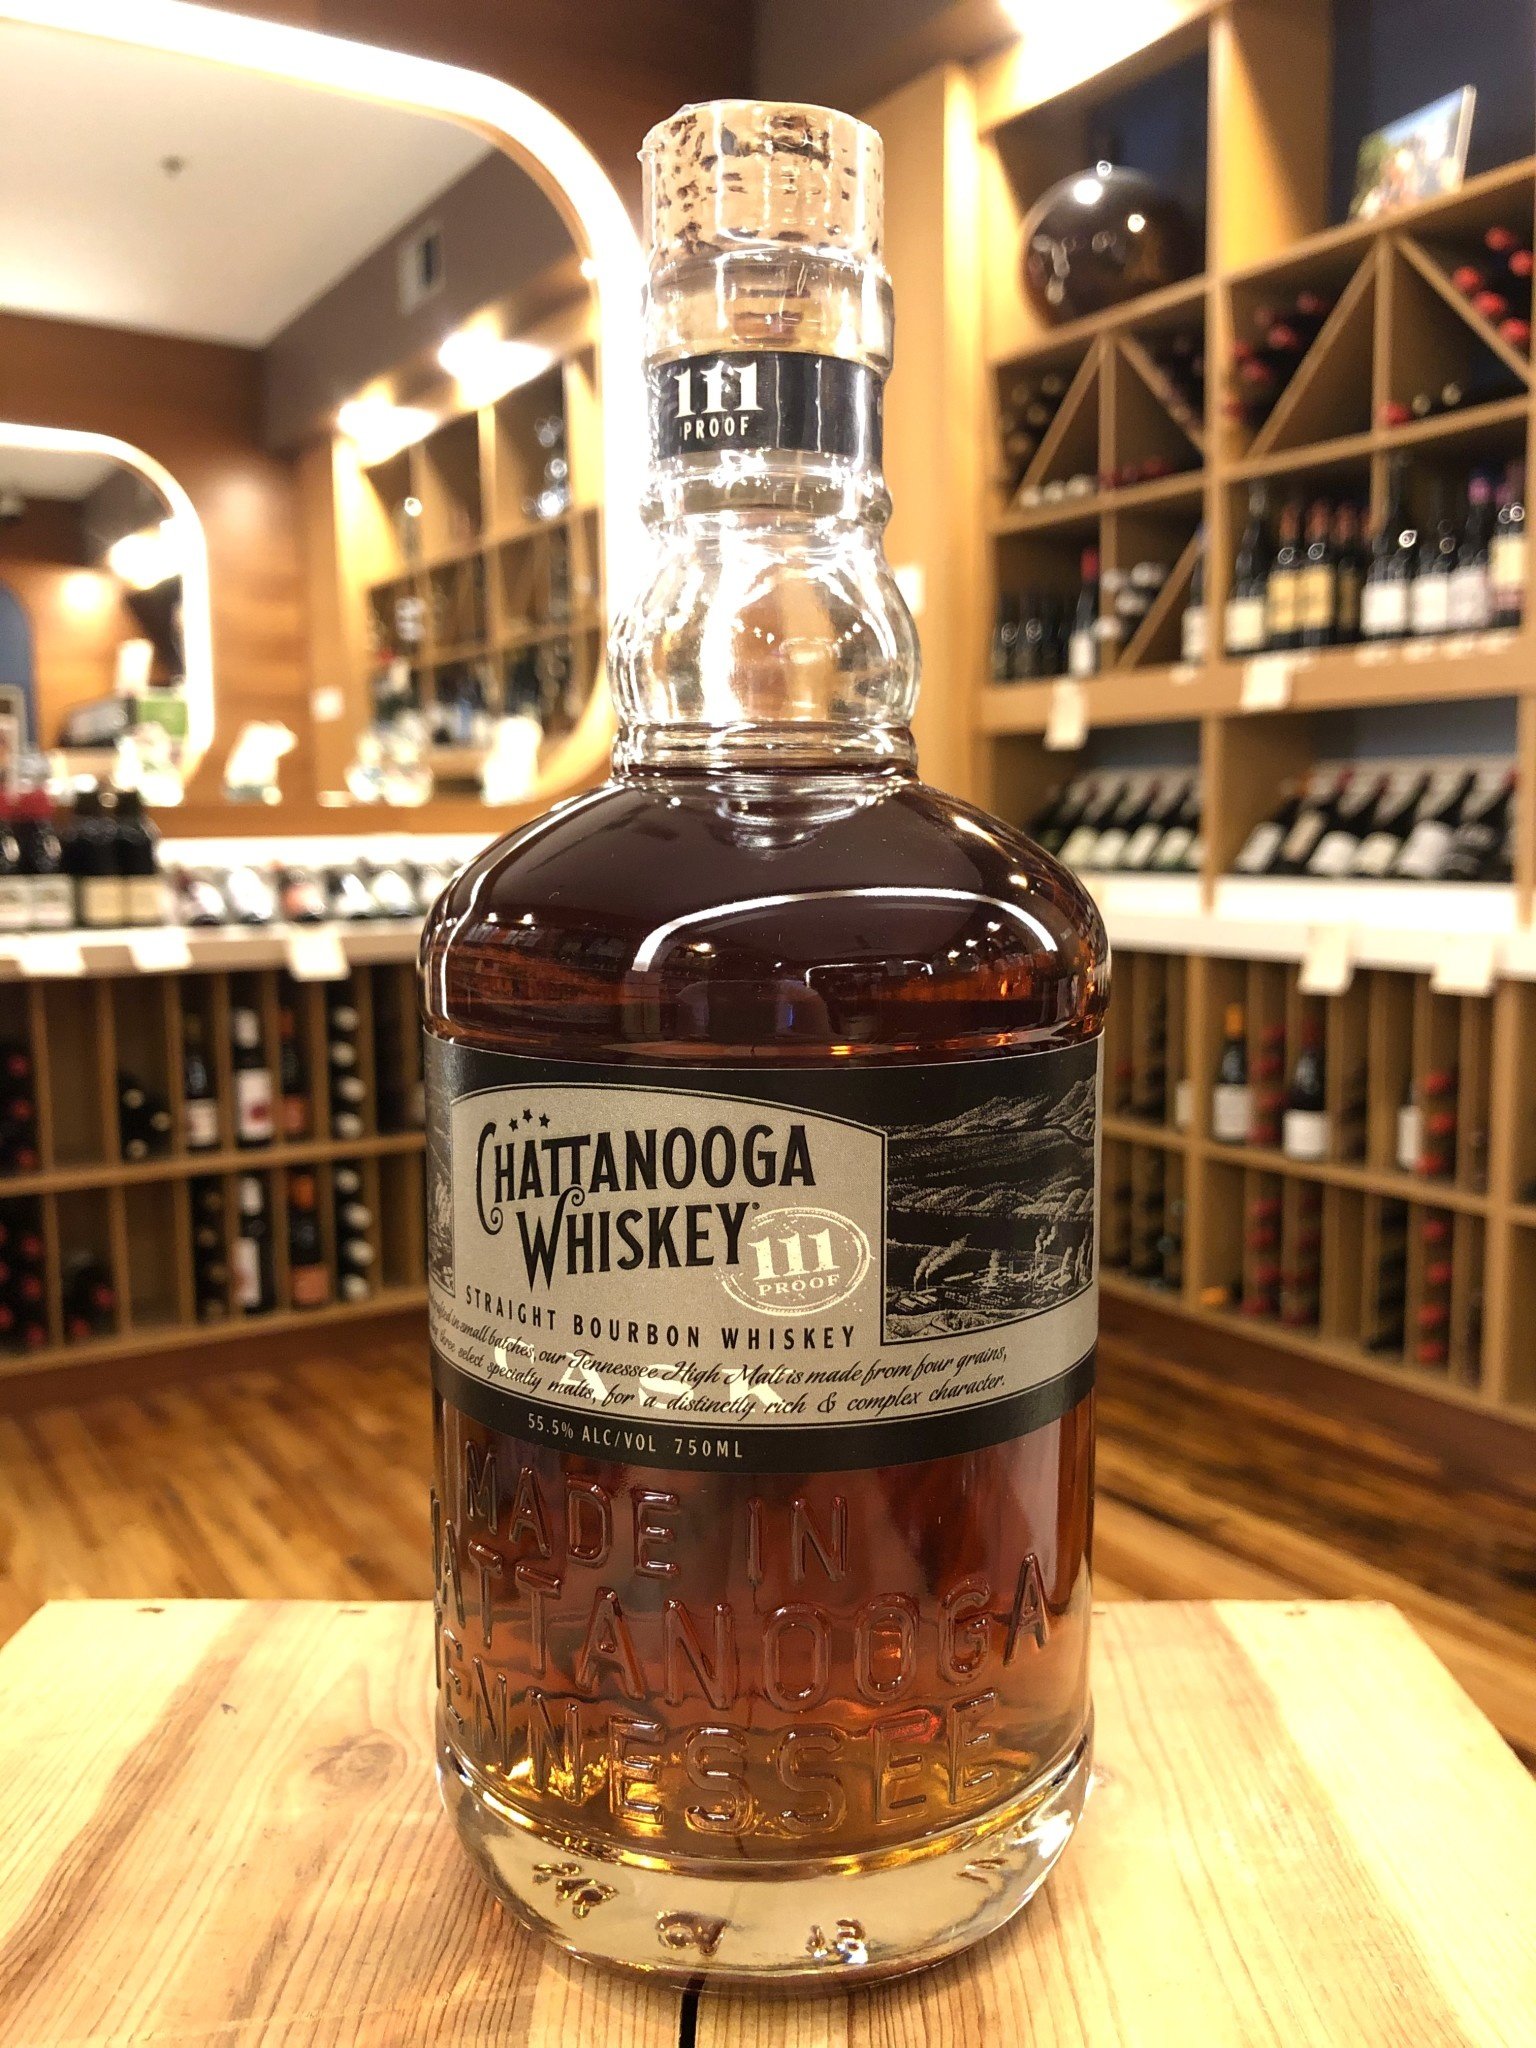 Chattanooga Whiskey 111 proof - 750 ML - Downtown Wine + Spirits